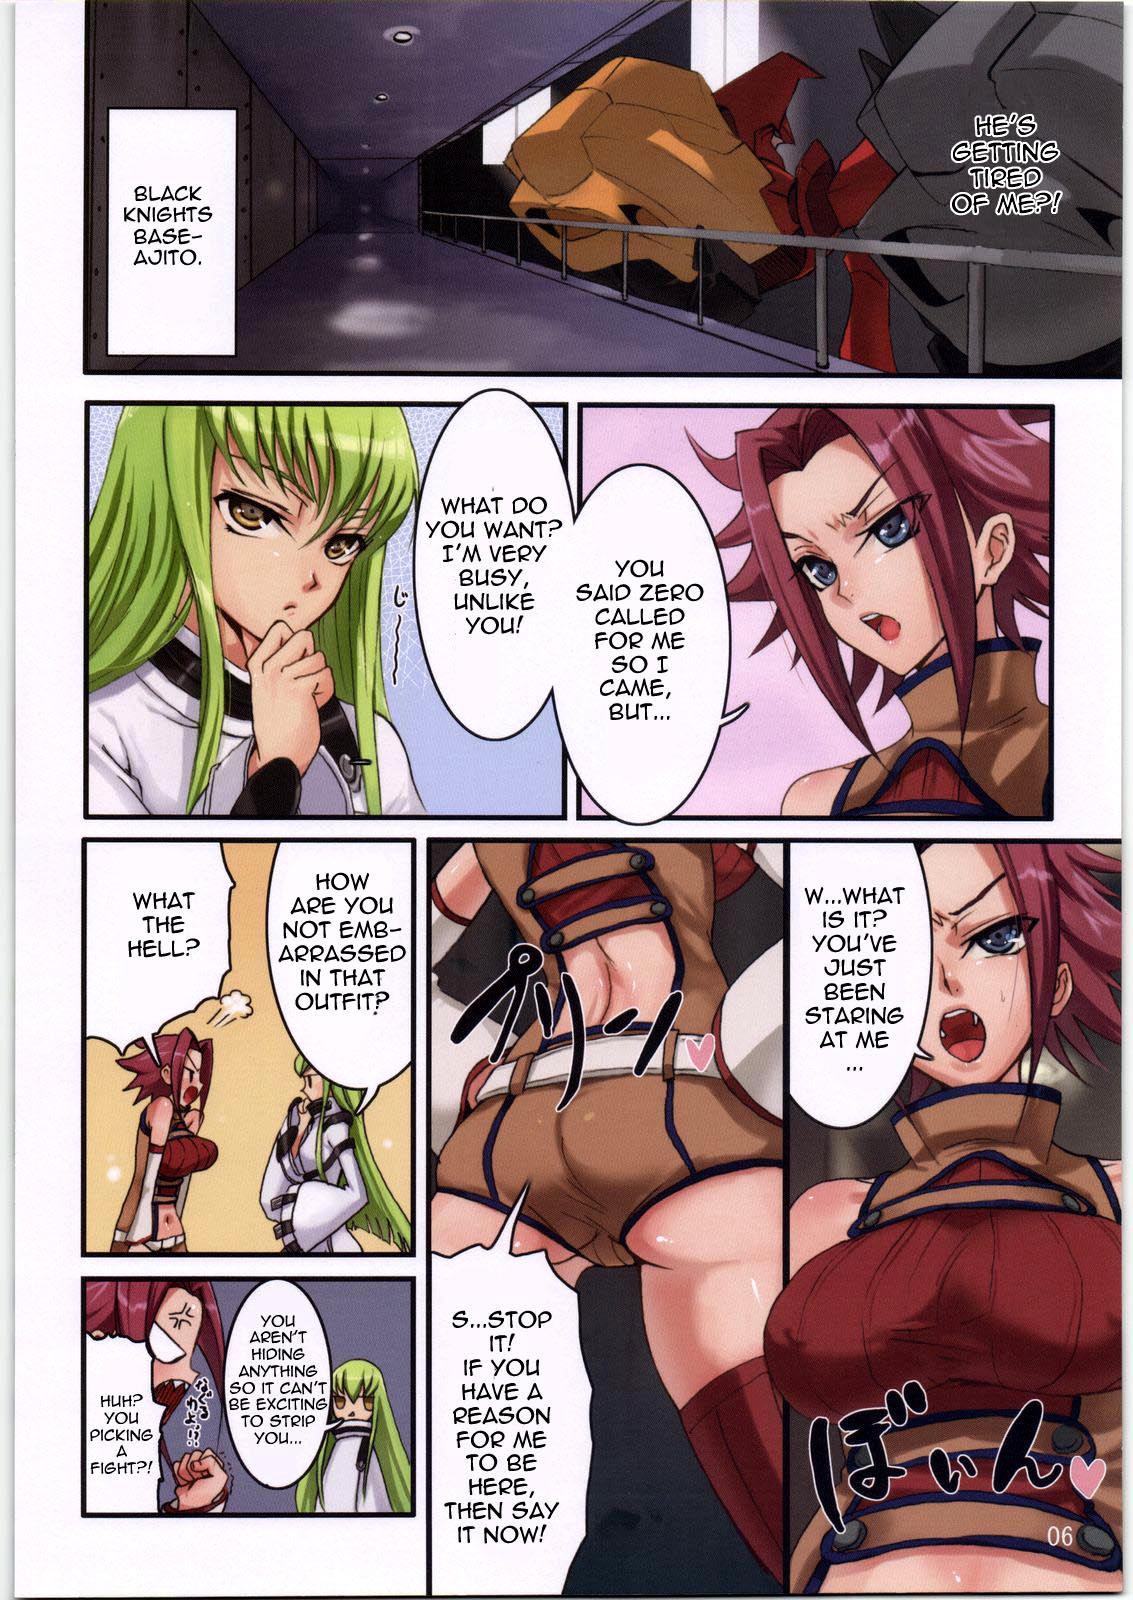 Redhead Majo no Itazura | Mischievous Witch - Code geass Leaked - Page 6